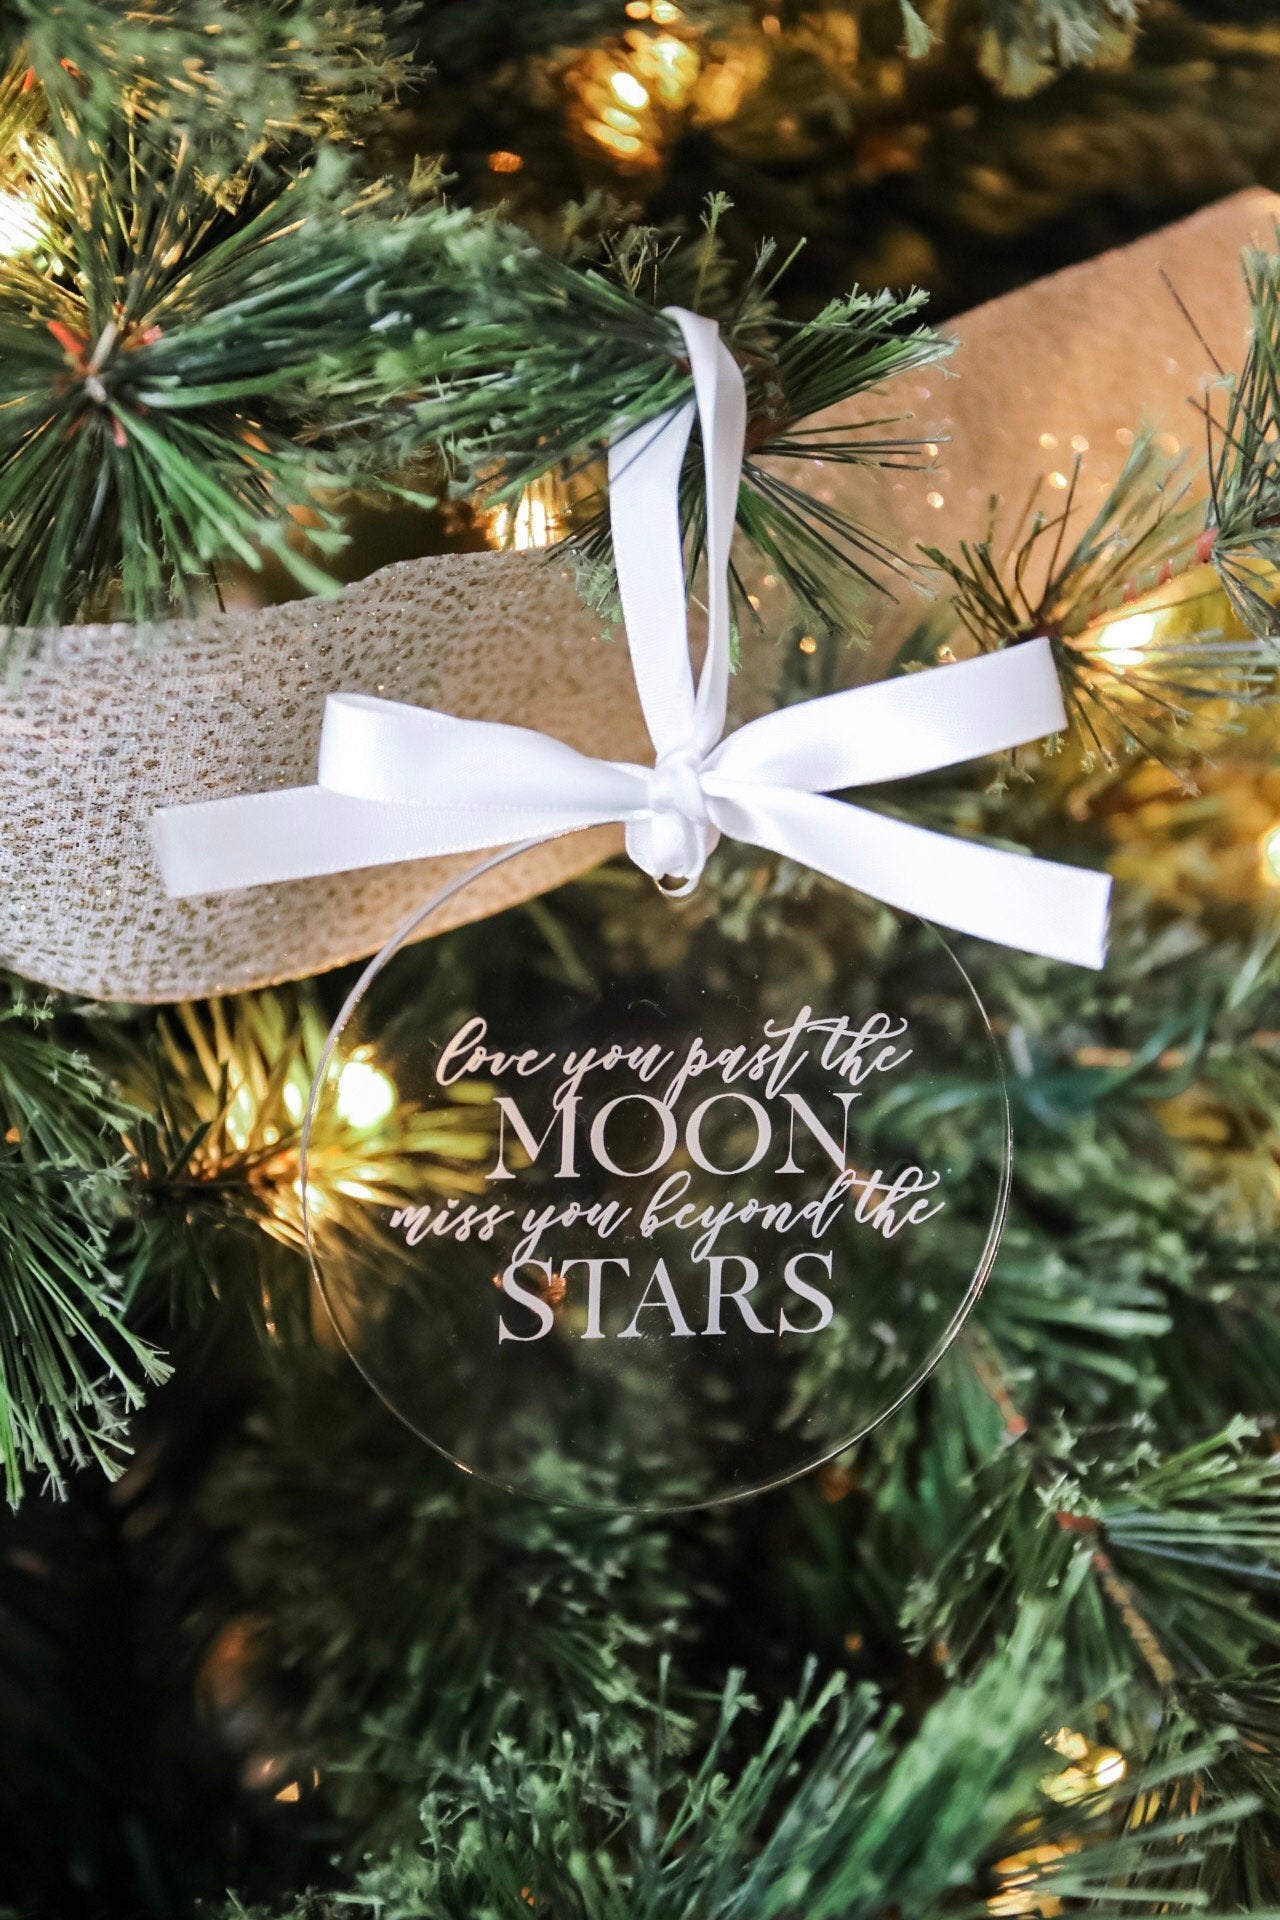 Moon and the Stars Memorial Ornament | Christmas Ornament